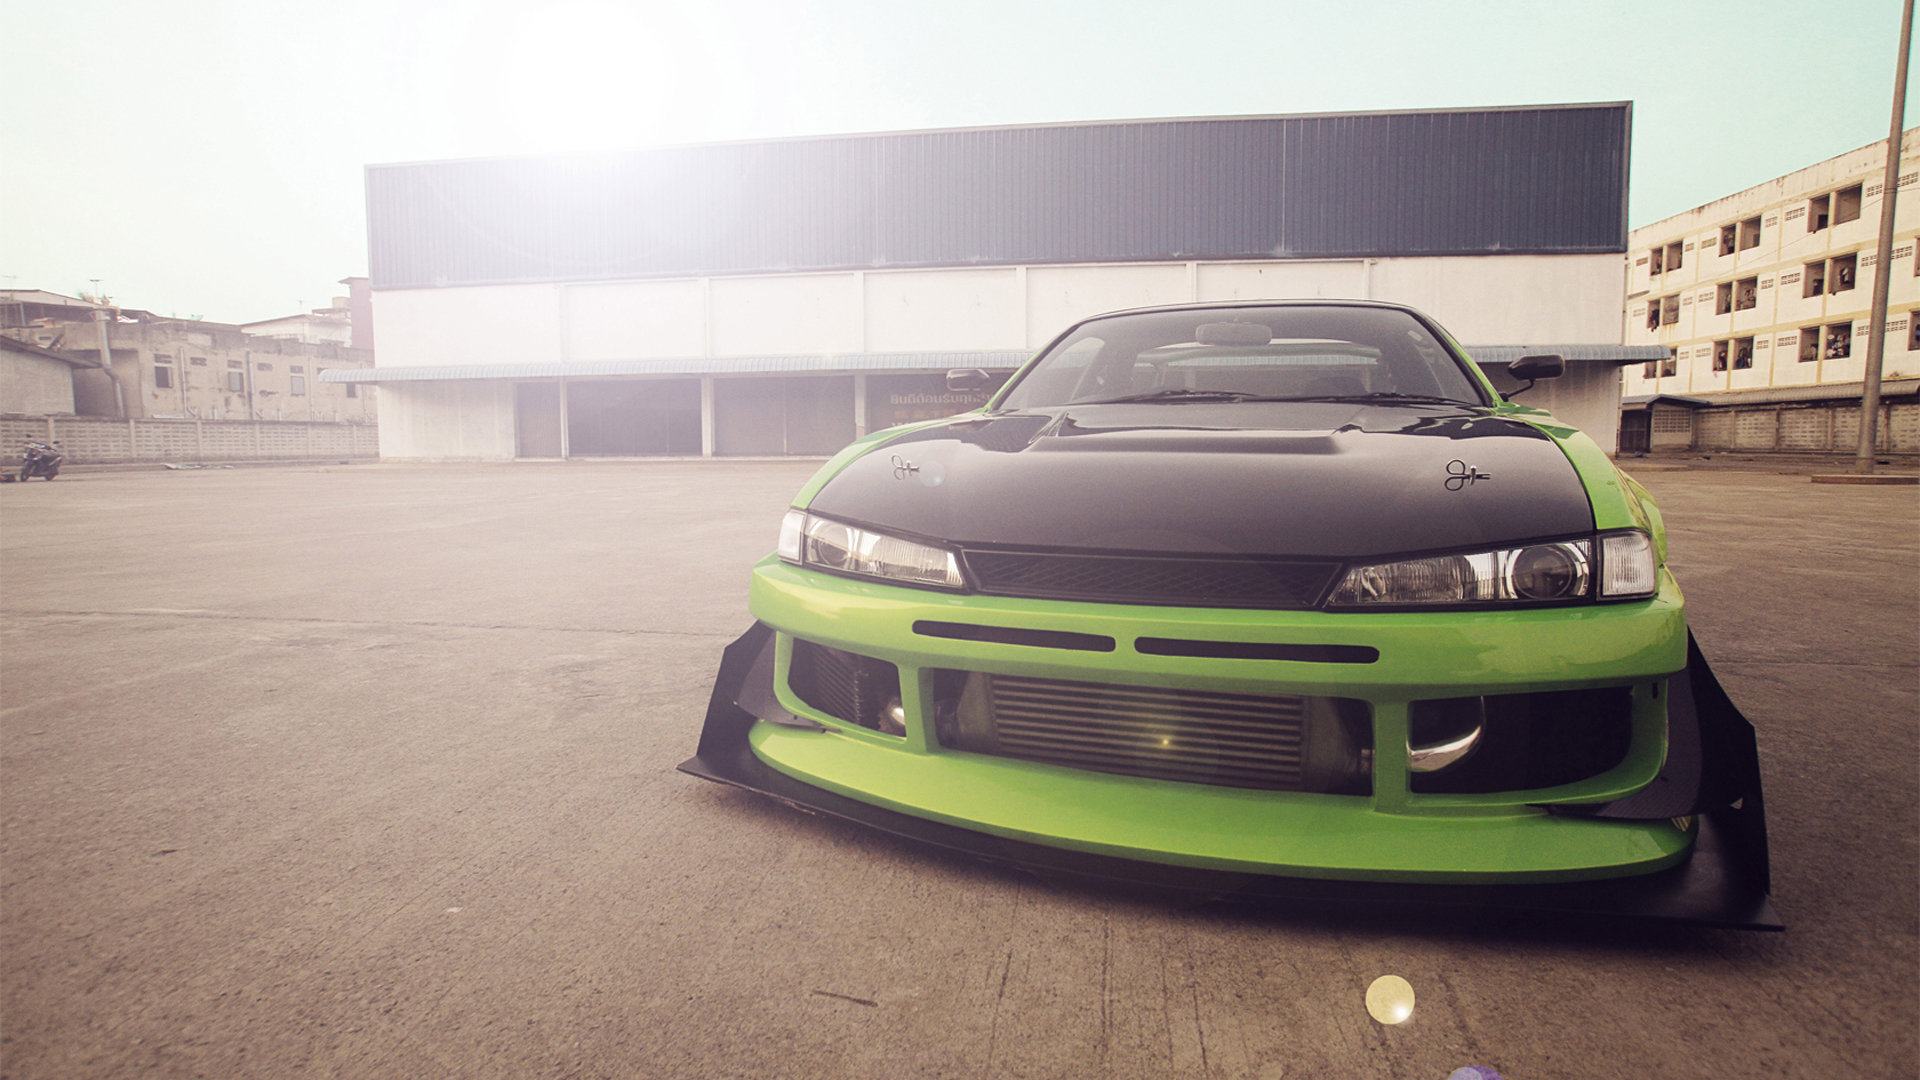 Download full hd 1920x1080 Nissan Silvia S14 PC background ID:207683 for free